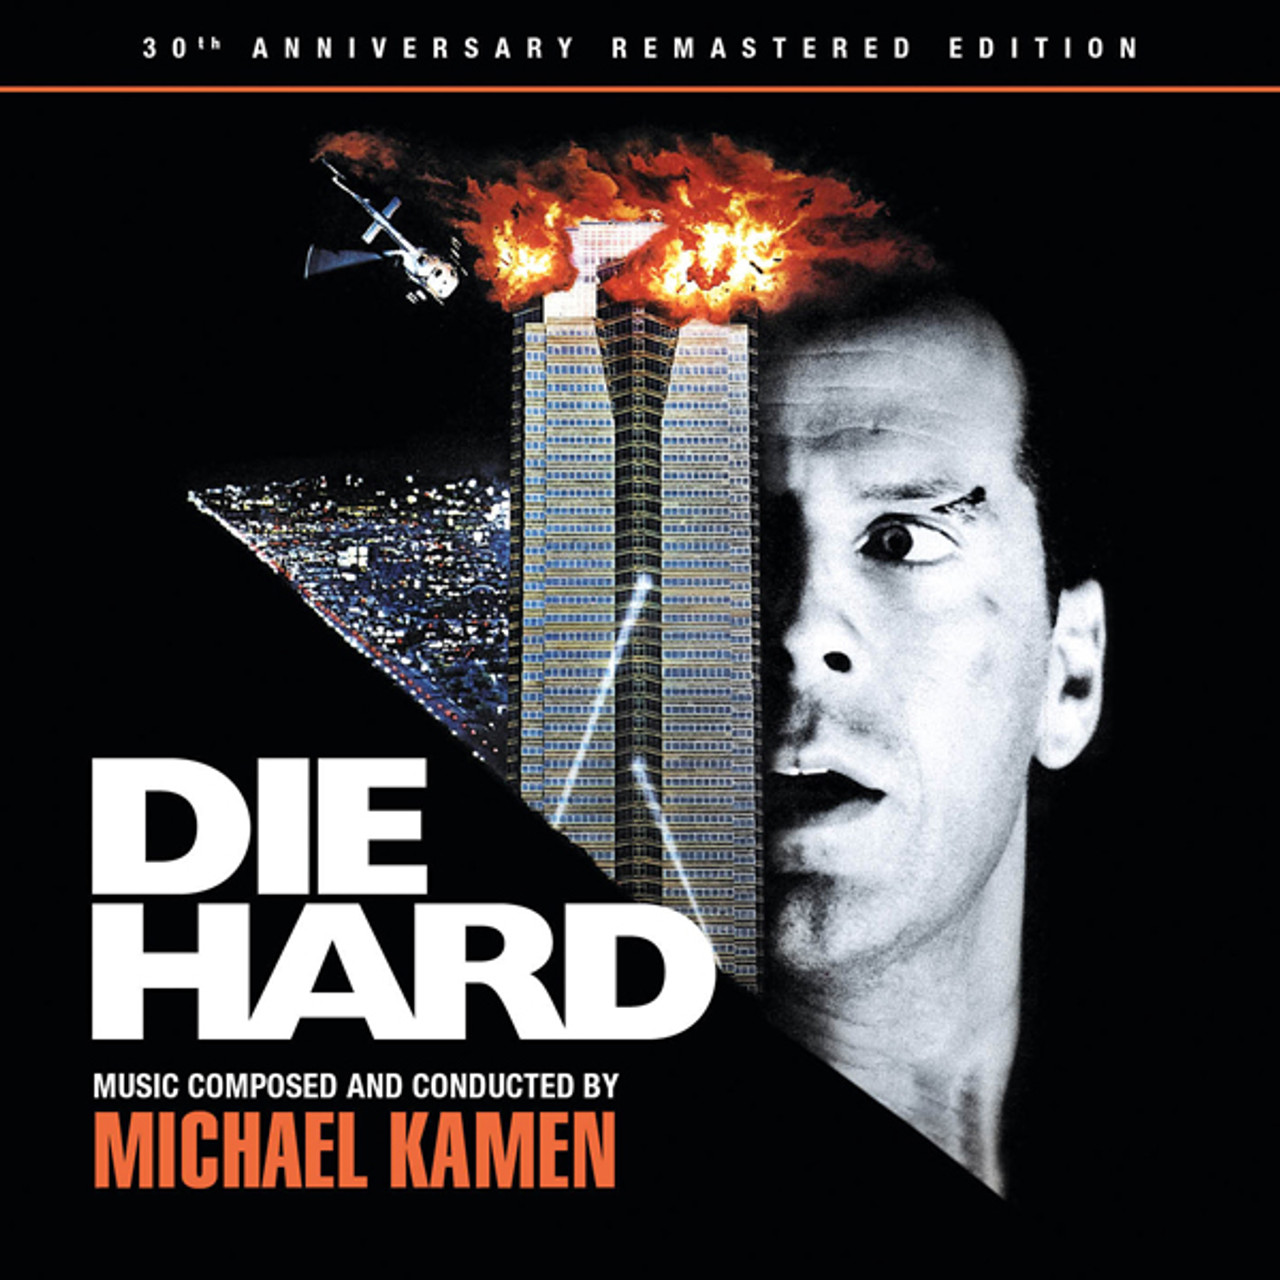 Die-Hard-30th-iTune-square-600px__31575.